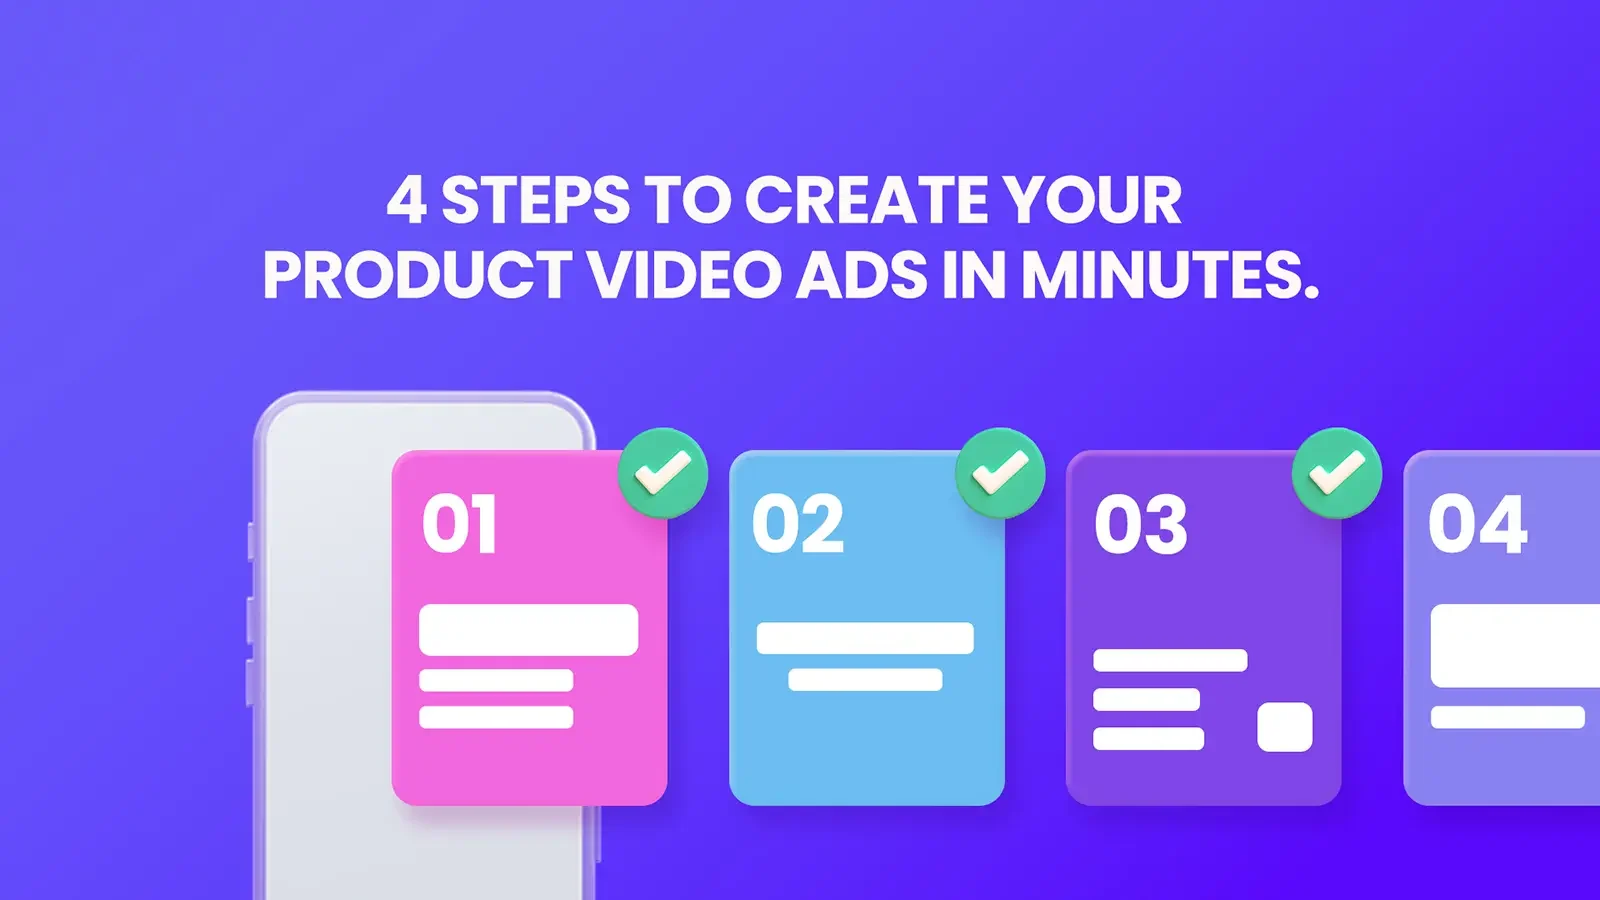 4 steps to create your product video ads in minutes